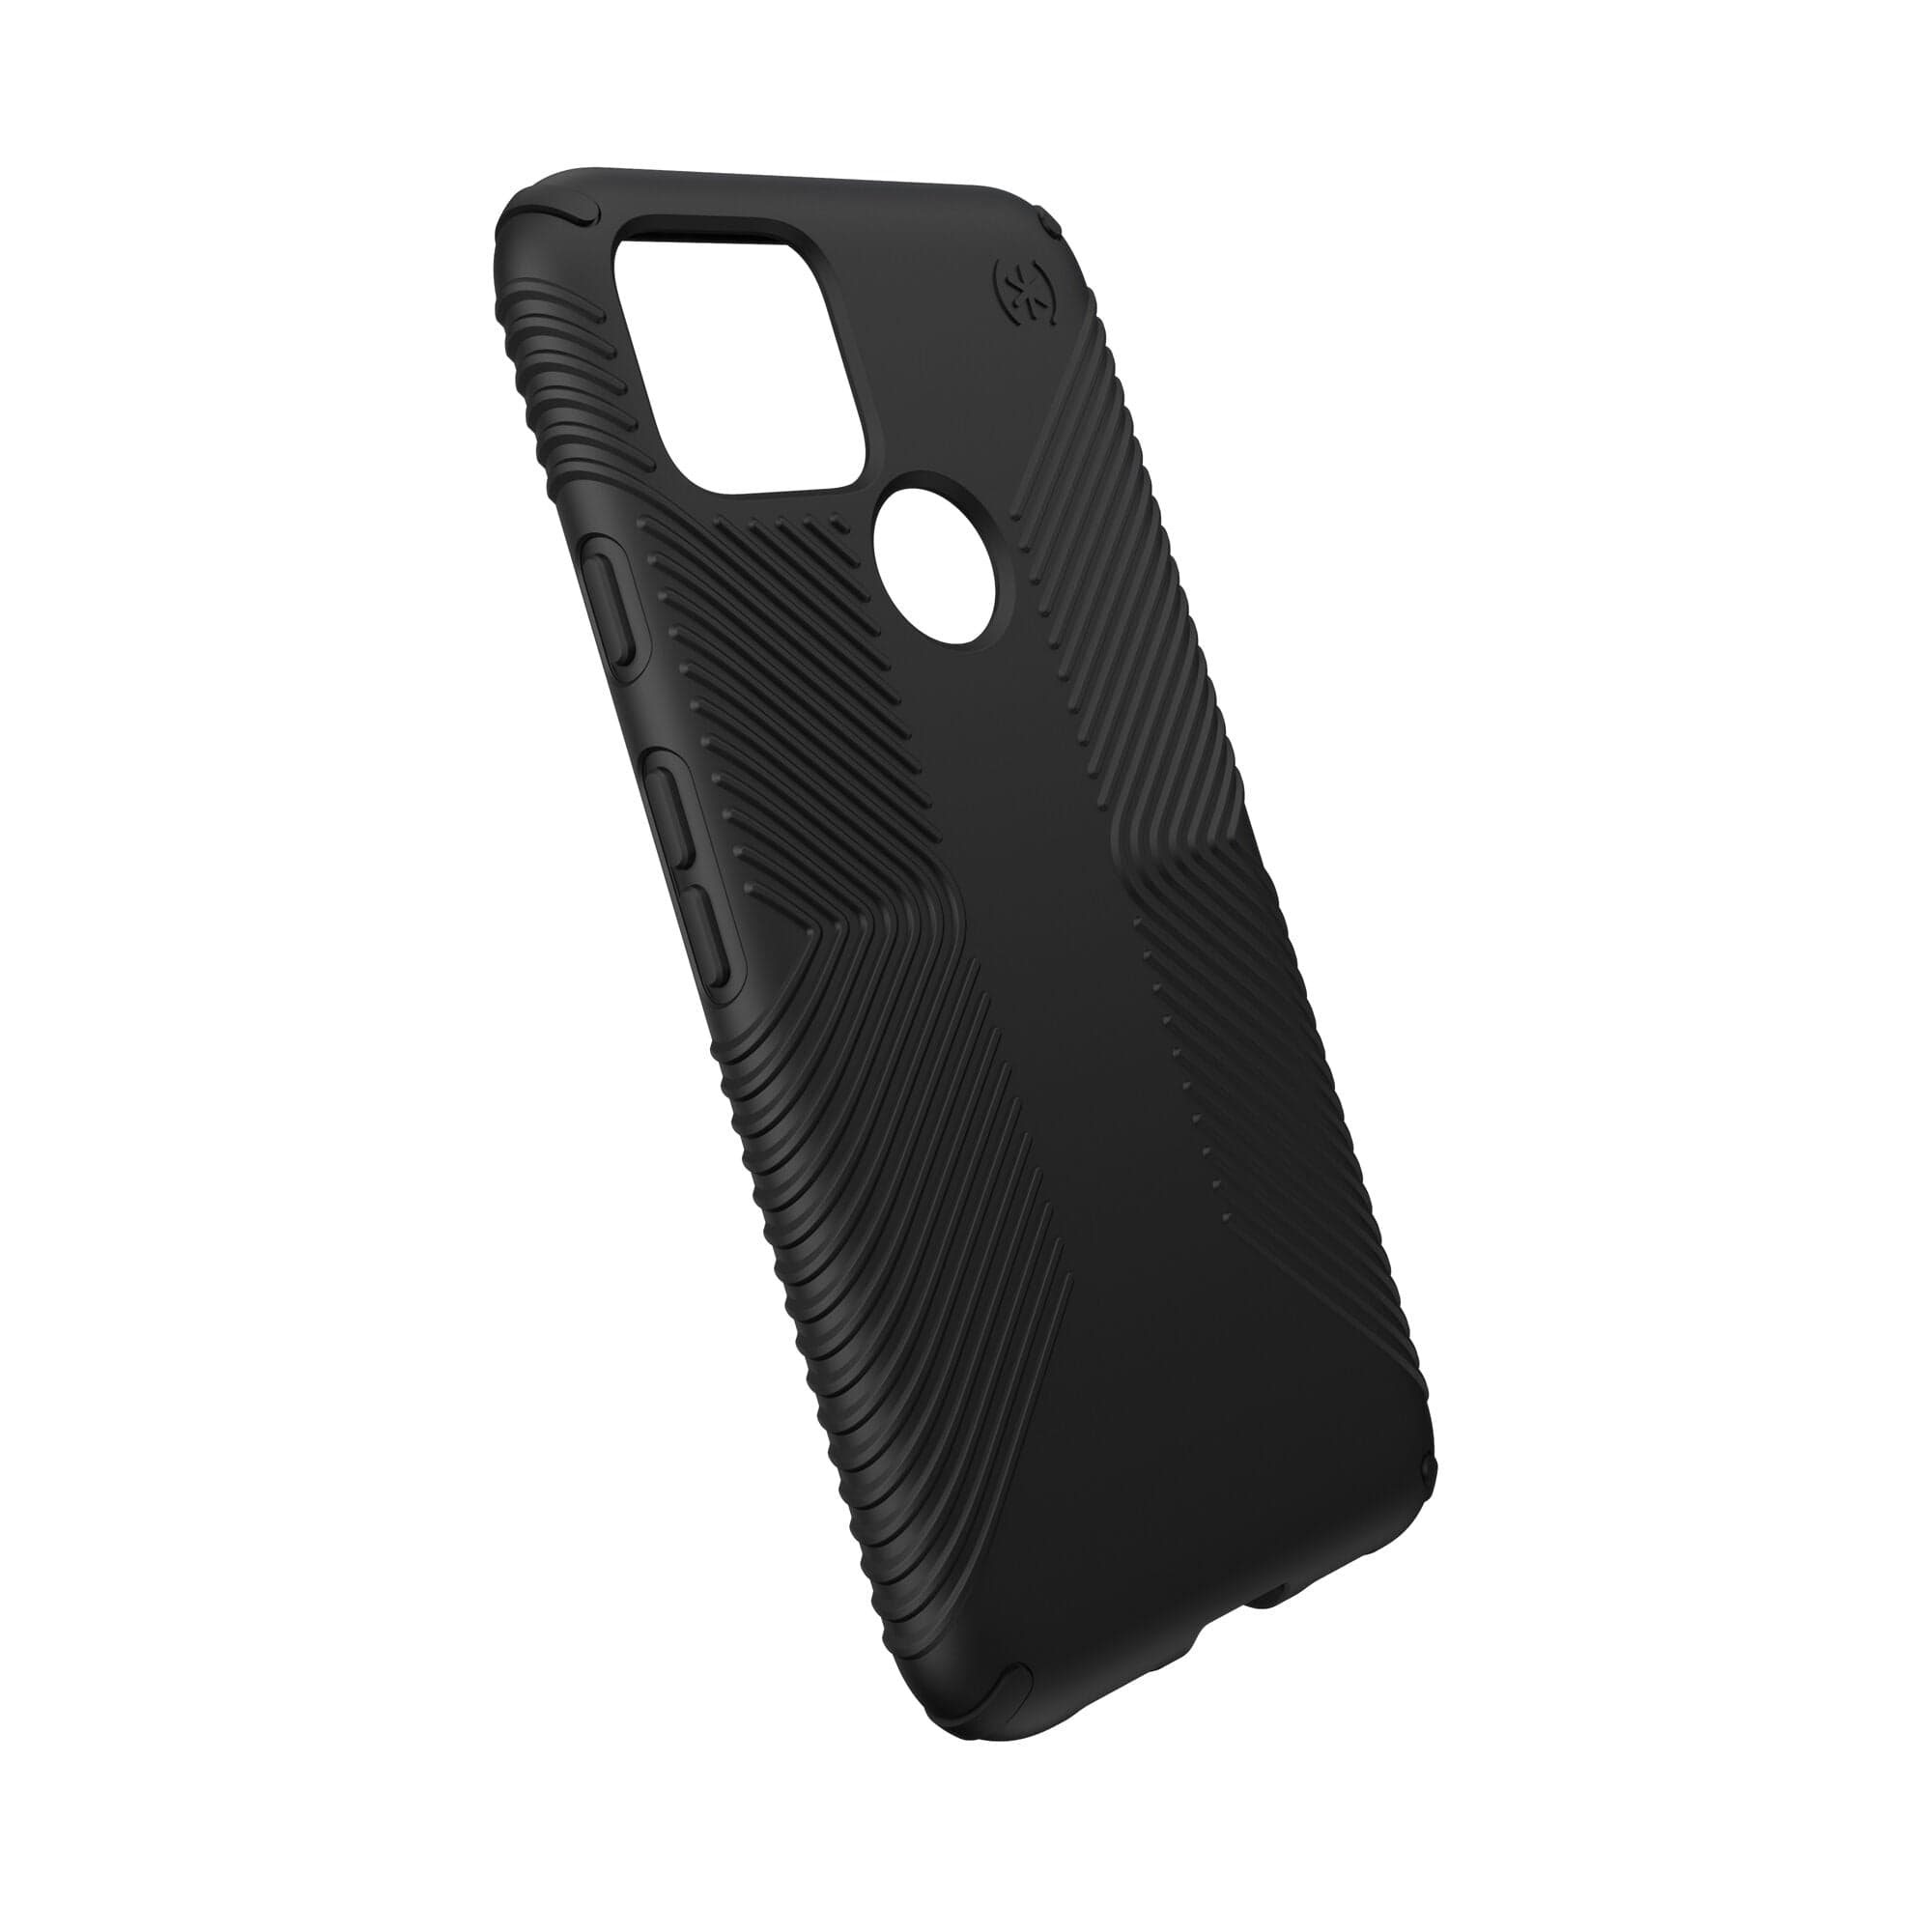 Presidio ExoTech with Grips Google Pixel 5 Cases